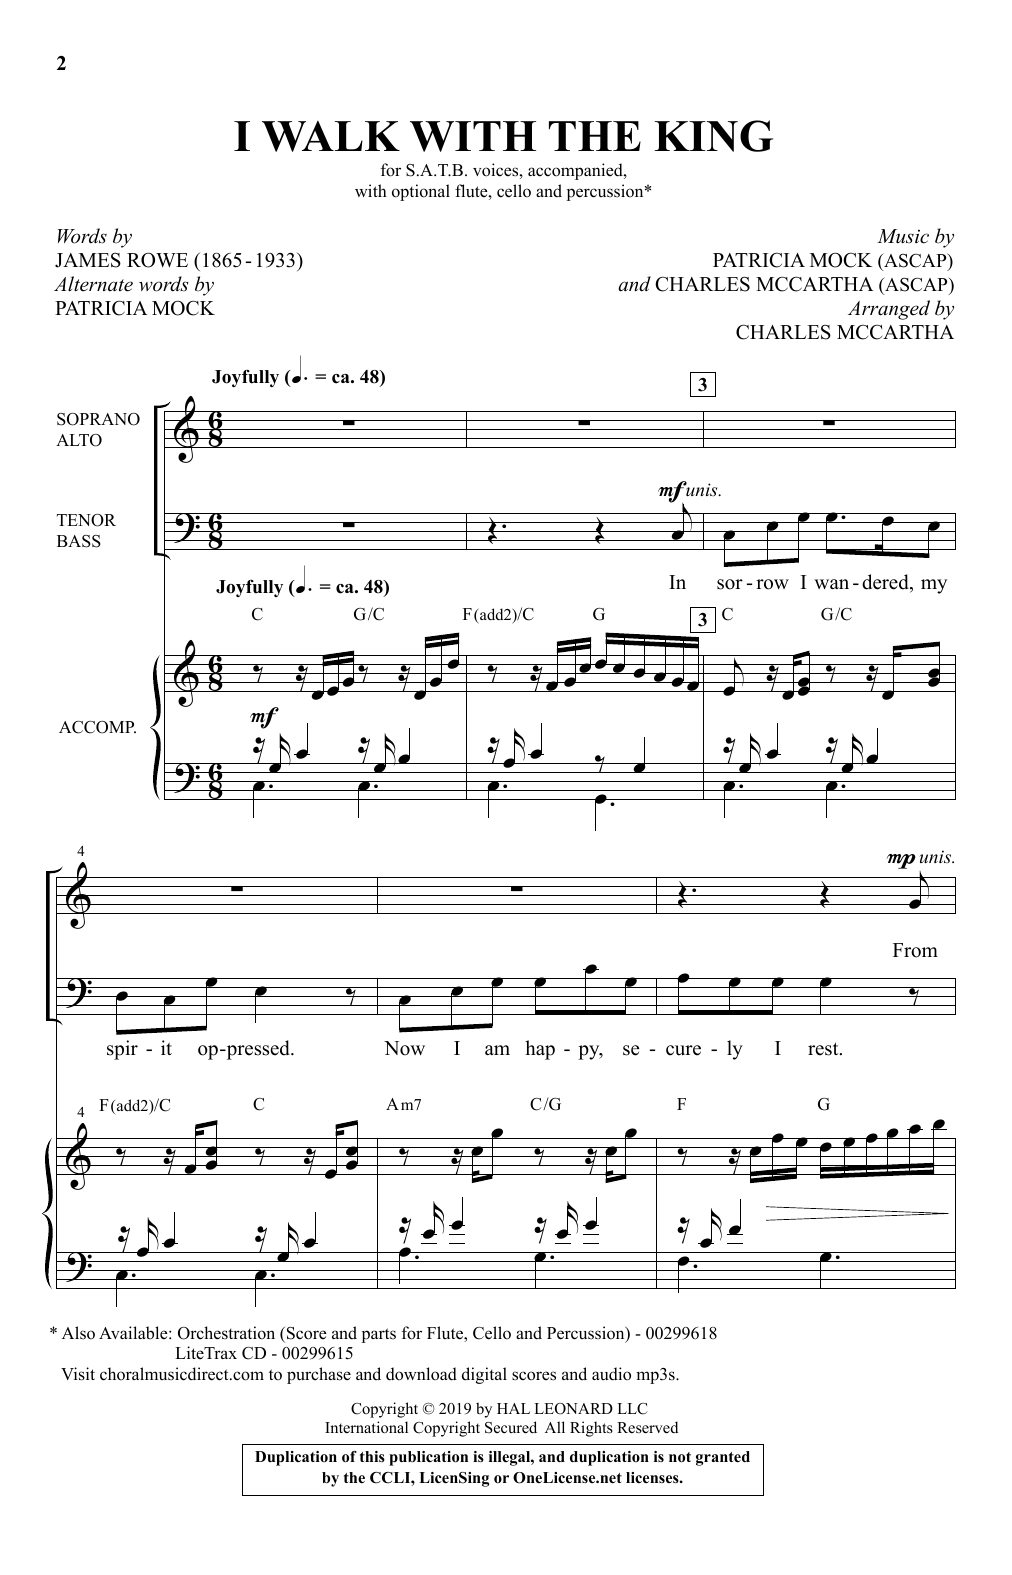 Download James Rowe, Patricia Mock and Charle I Walk With The King Sheet Music